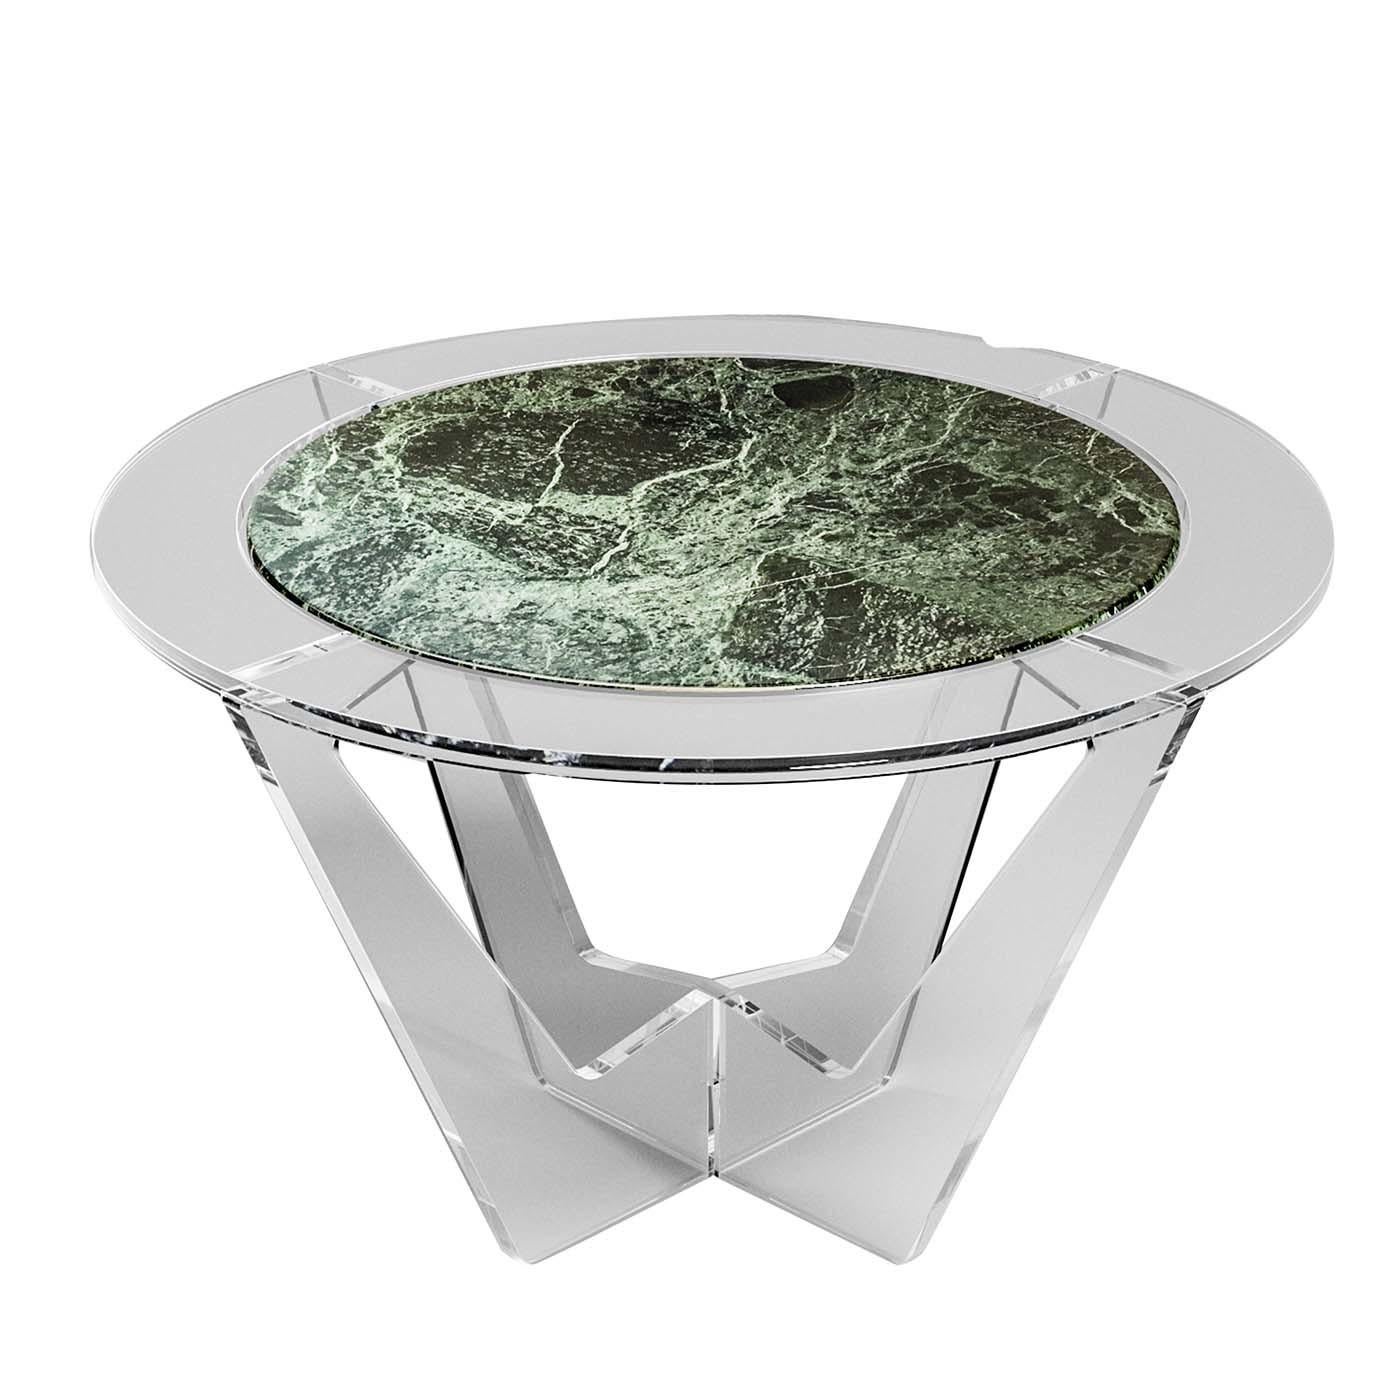 Italian Hac Round Coffee Table with Green Alps Marble Top by Madea Milano